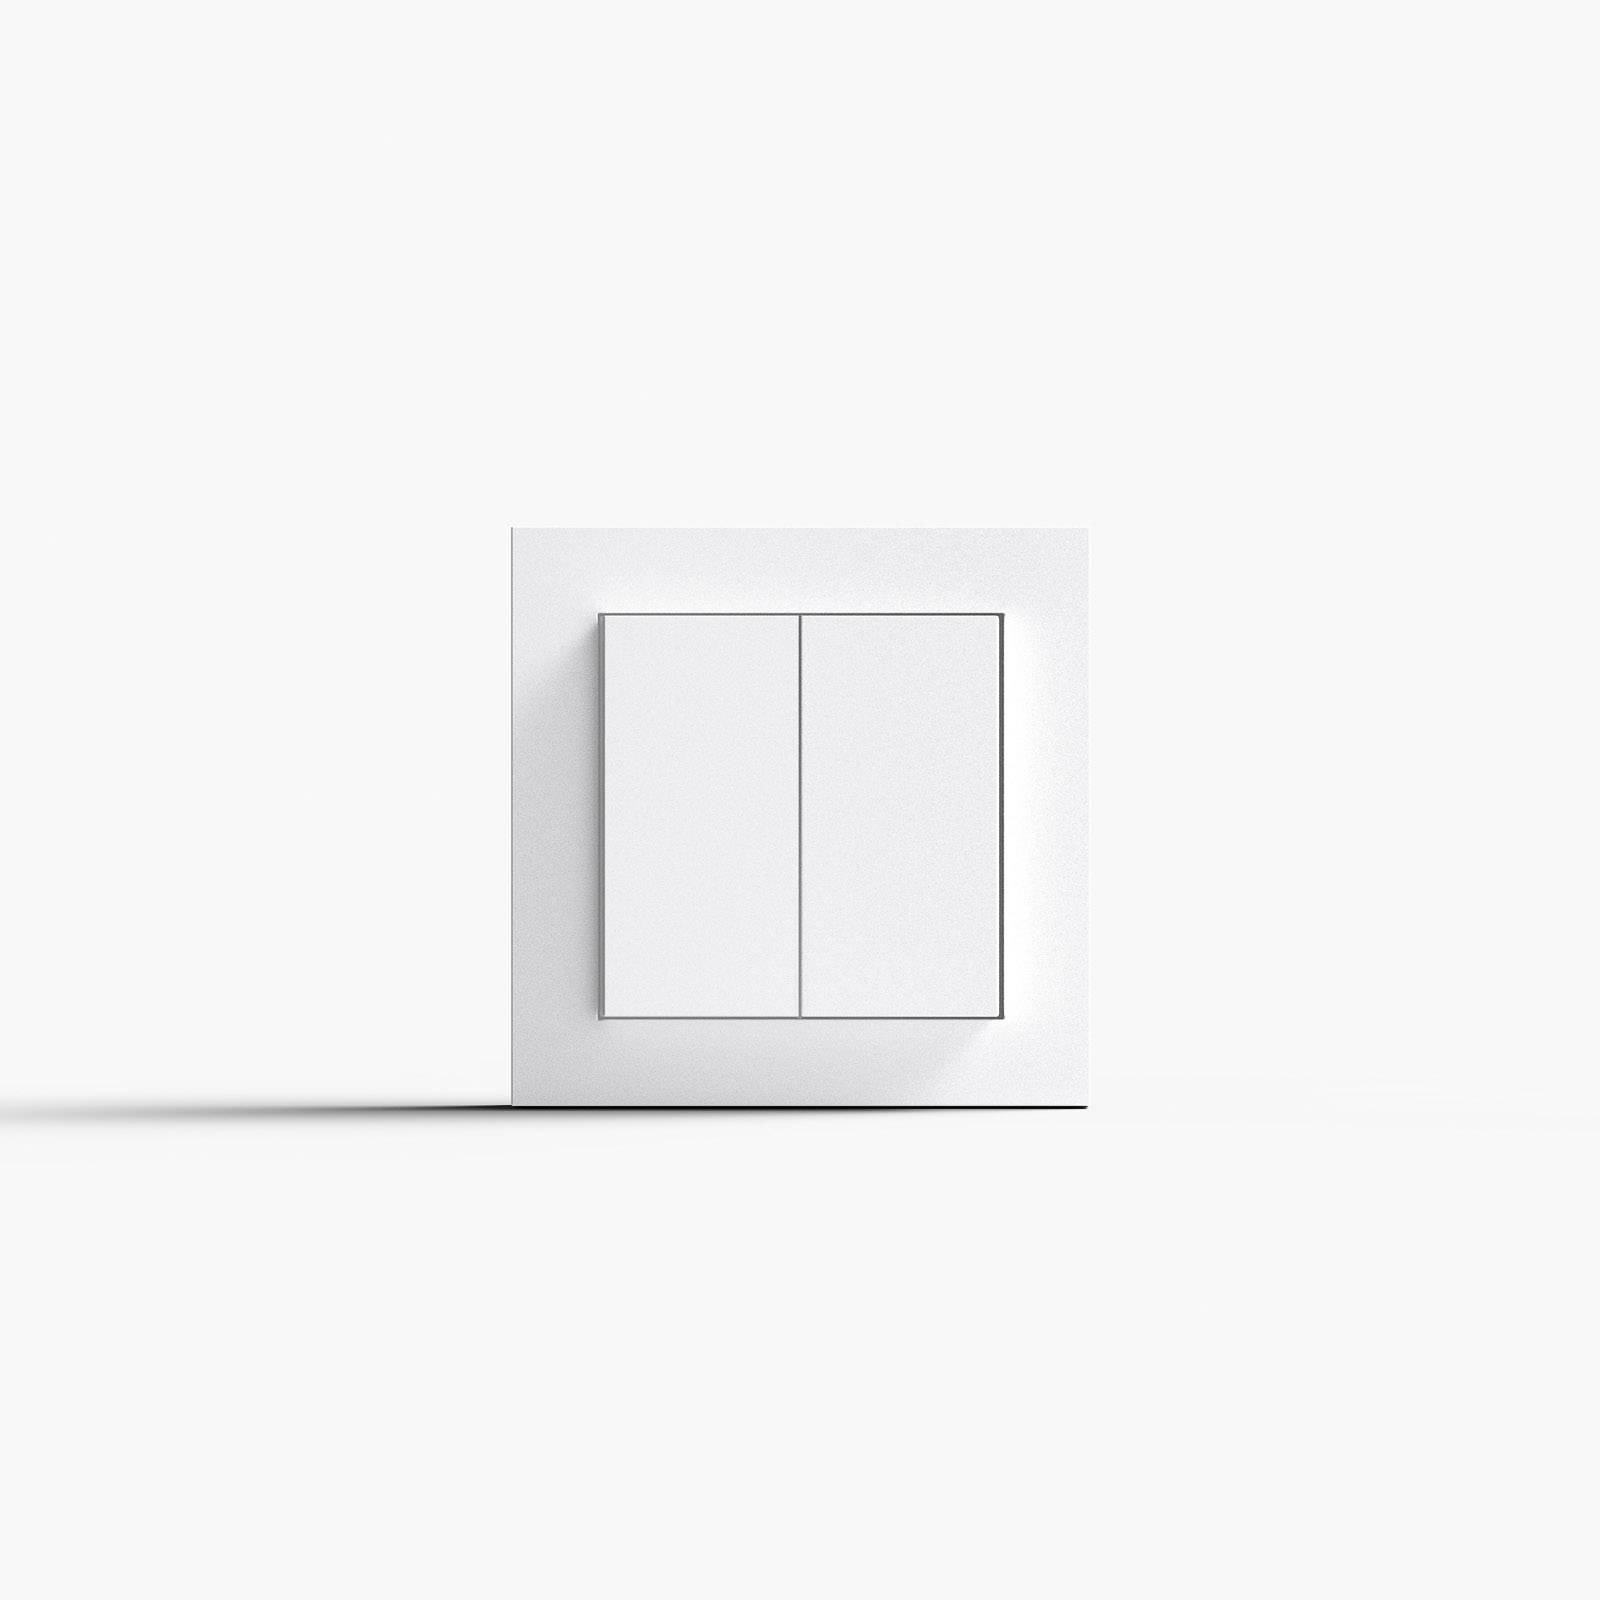 Image of Senic Smart Switch pour Philips Hue, 1, blanc mat 4260476940088